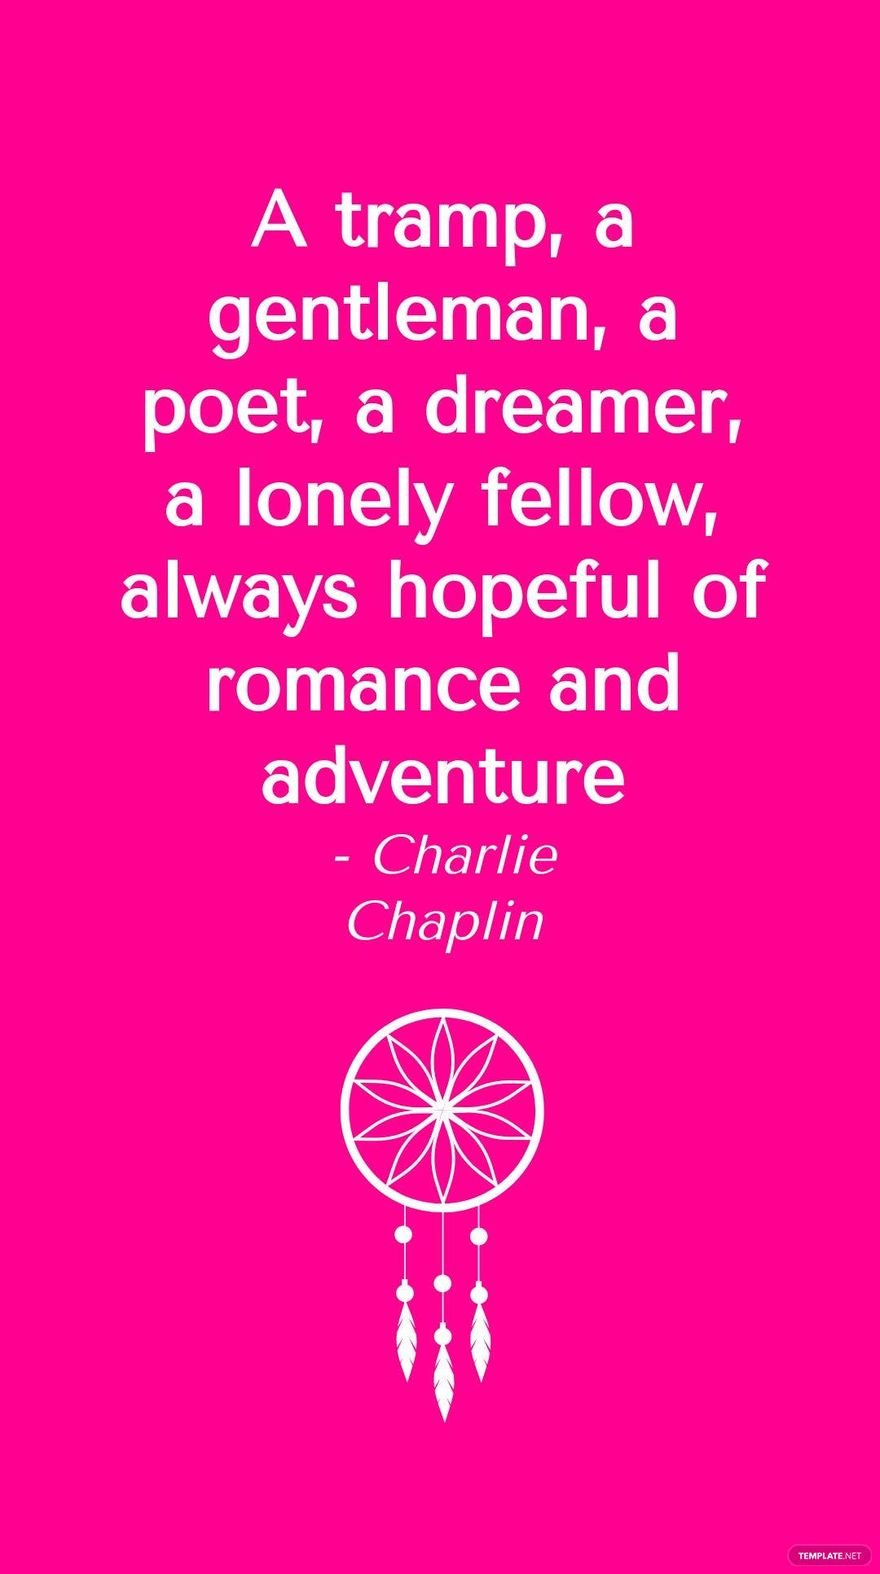 Charlie Chaplin - A tramp, a gentleman, a poet, a dreamer, a lonely fellow, always hopeful of romance and adventure in JPG